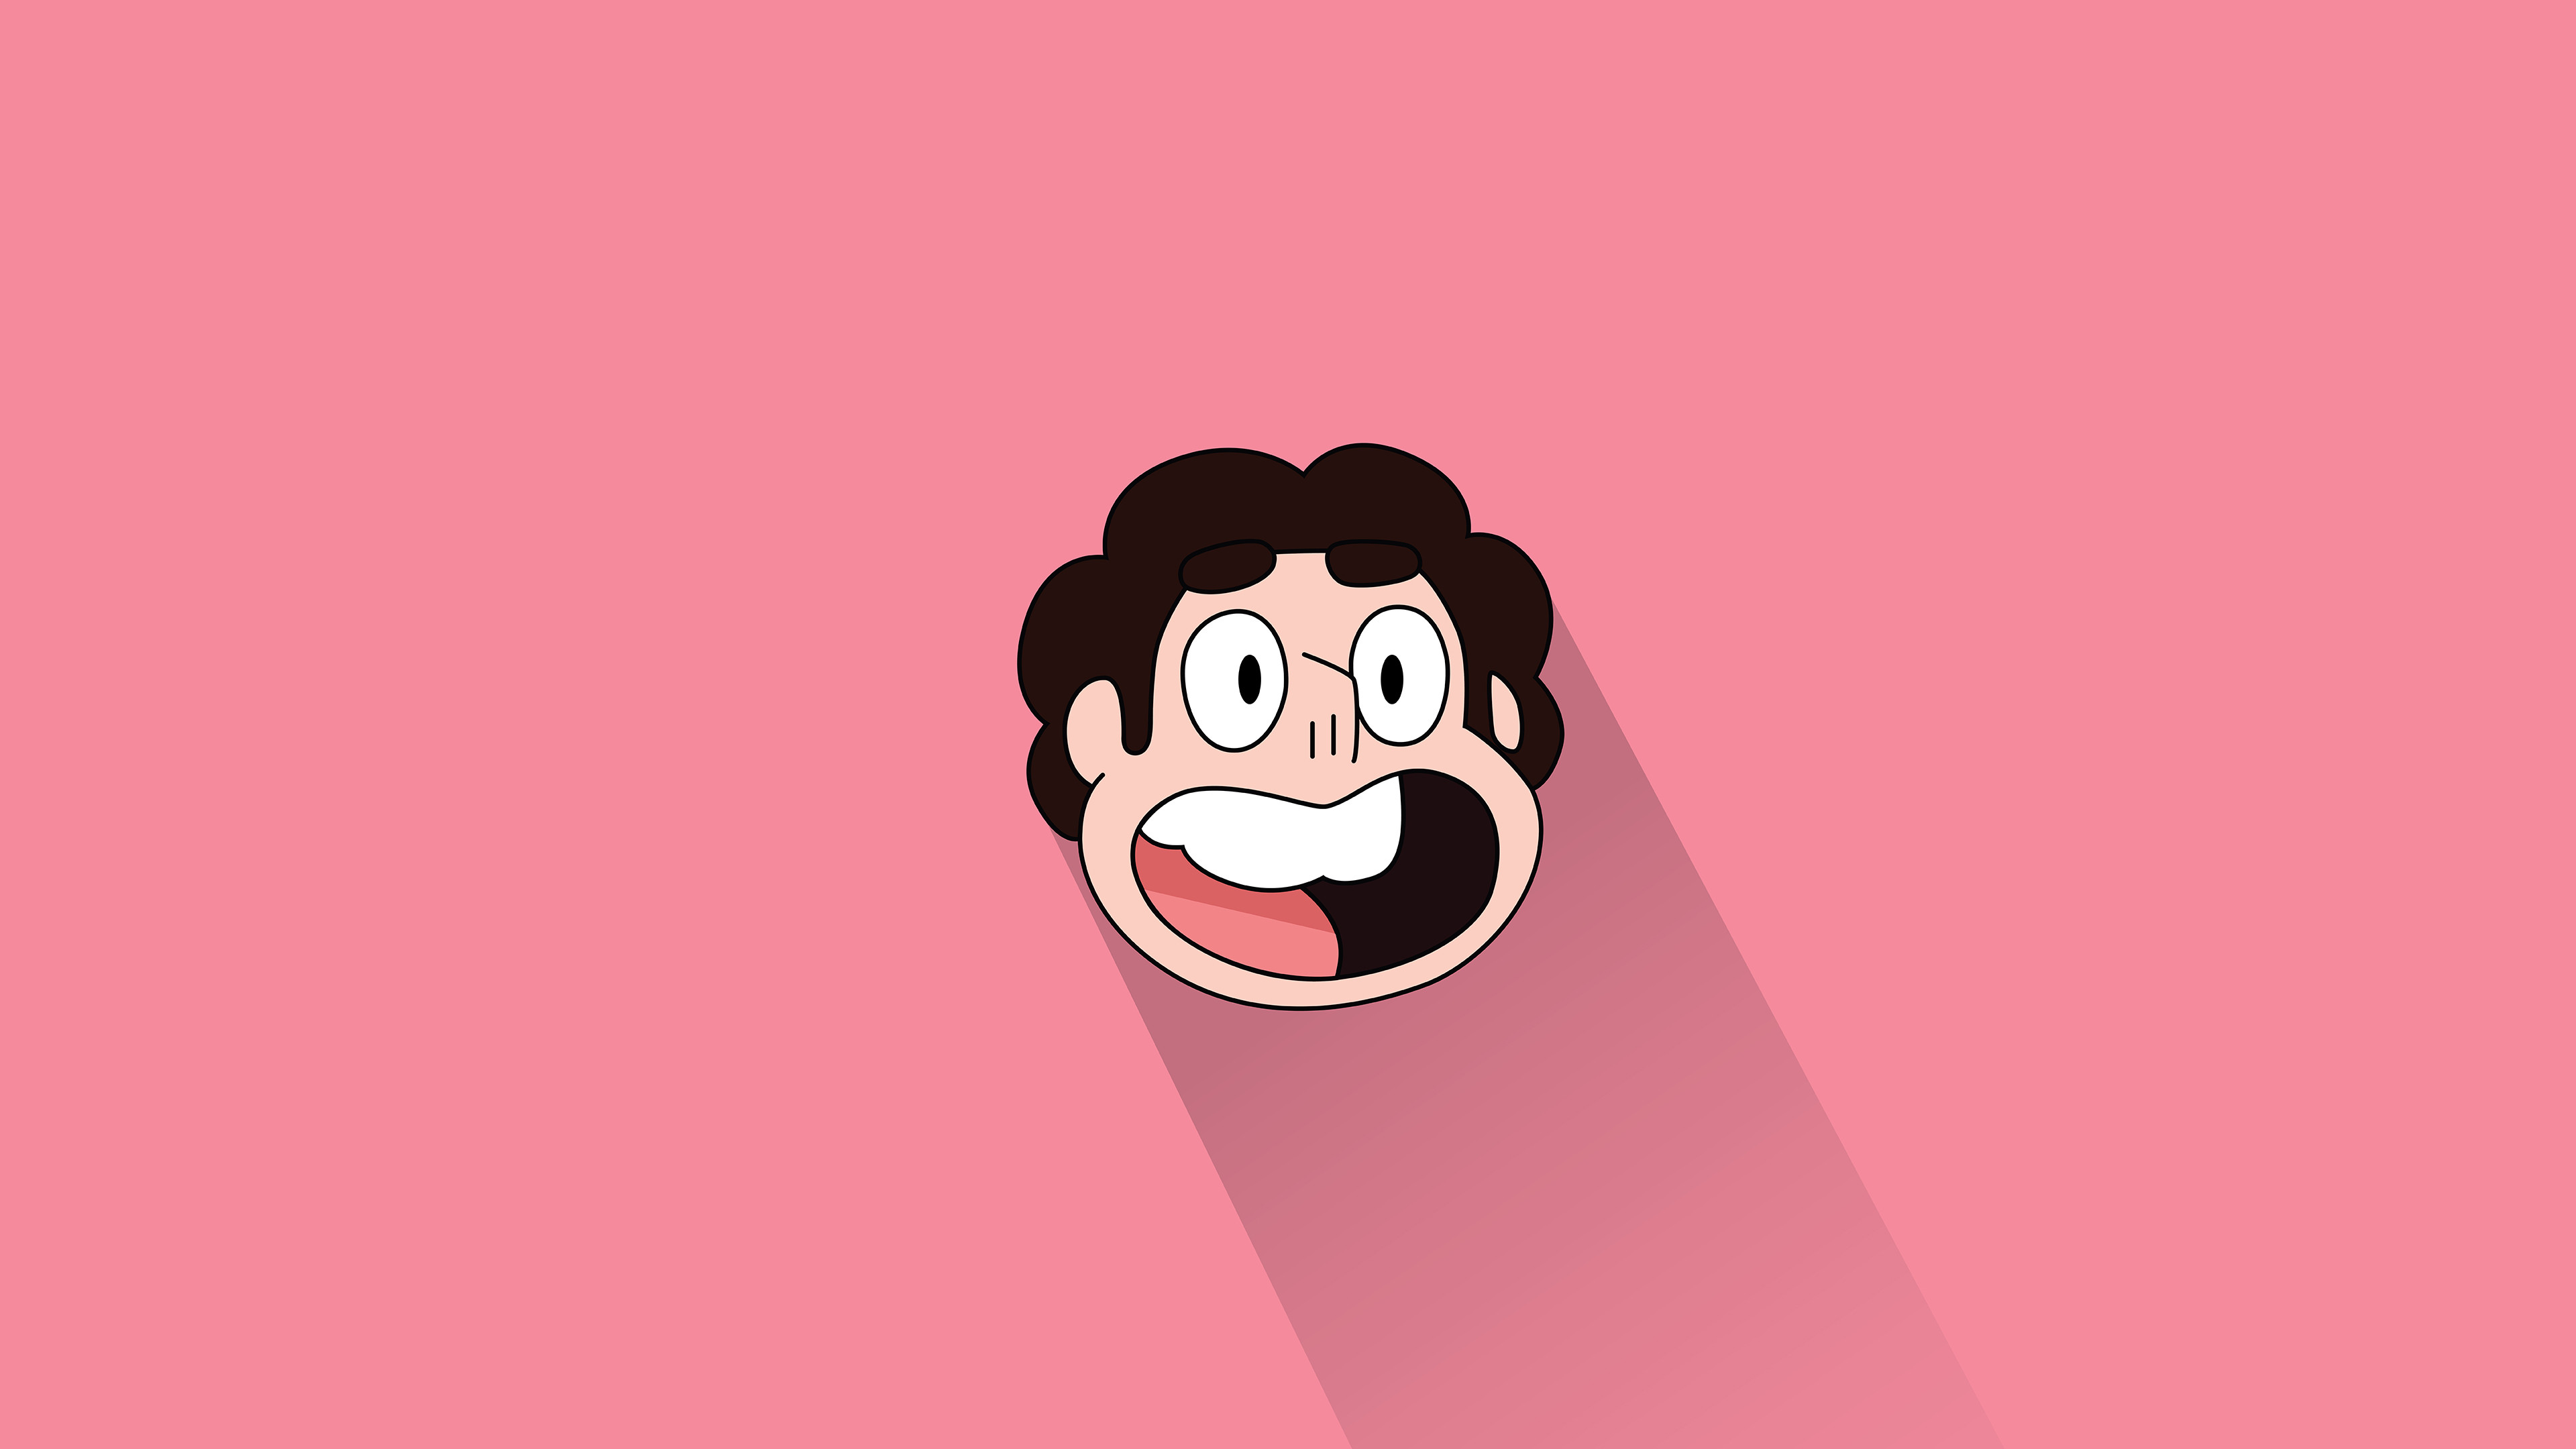 3840x2160 Steven Universe Wallpapers Pink by Paralitik Steven Universe Wallpapers  Pink by Paralitik